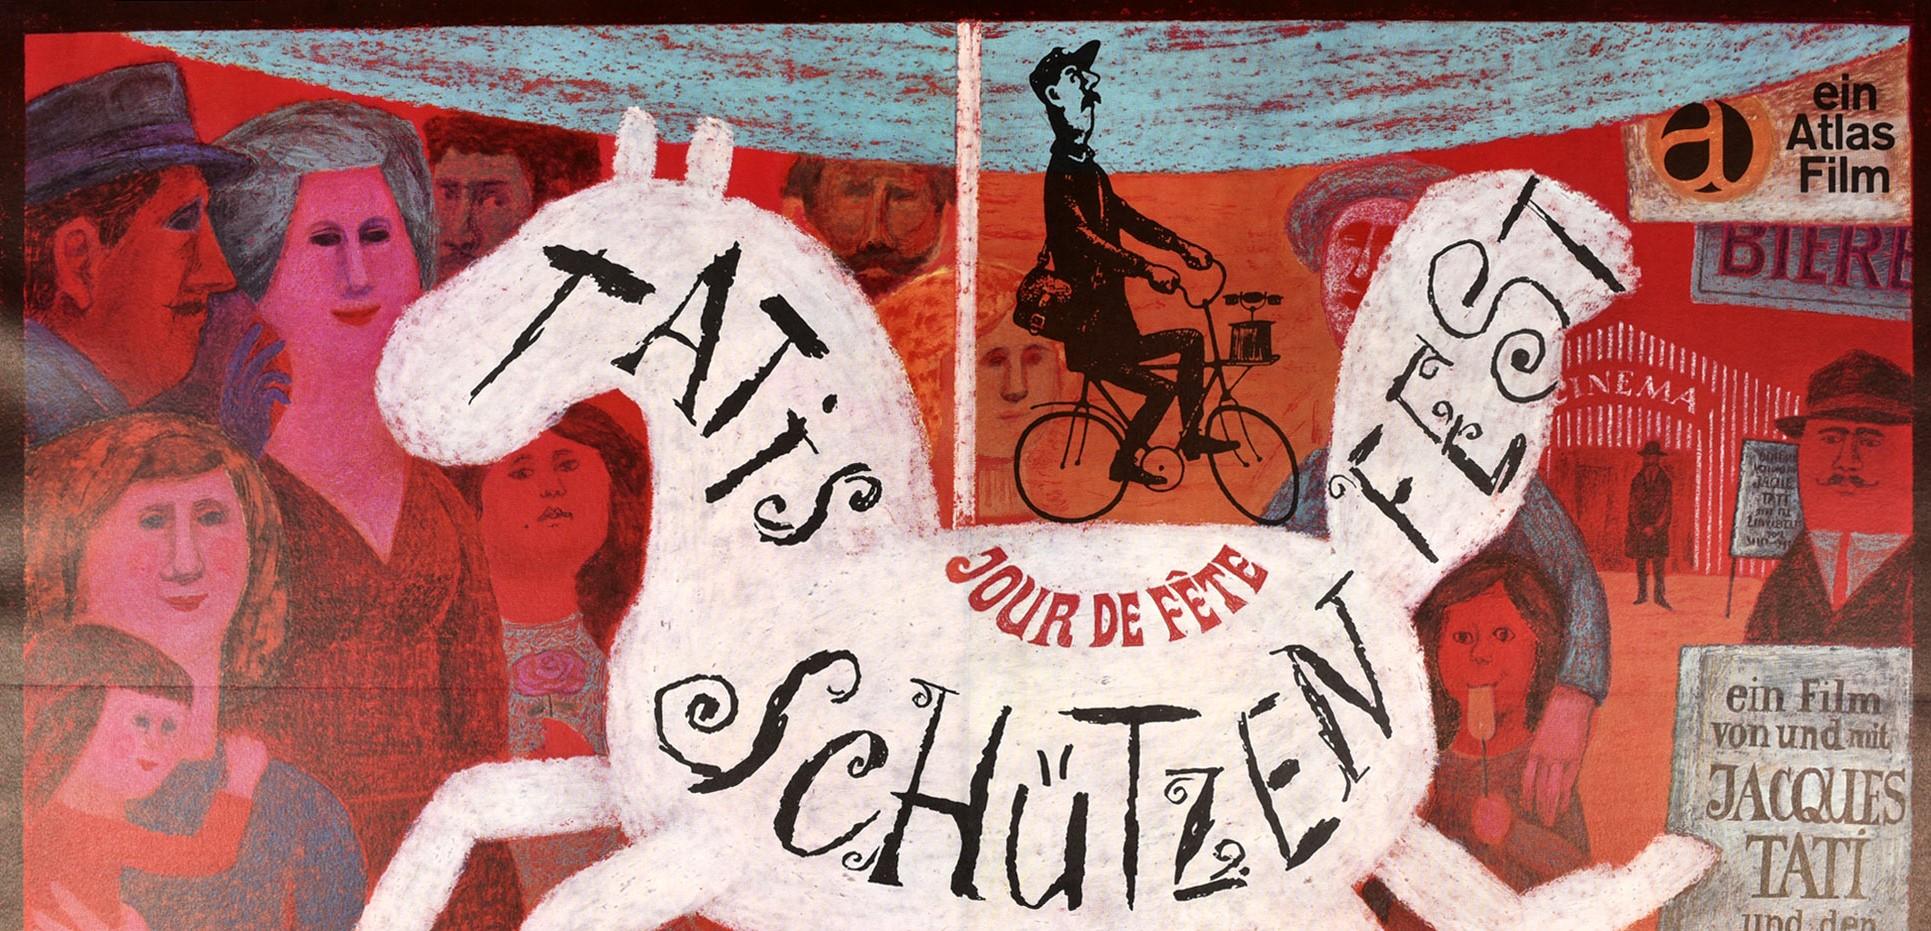 Original vintage movie poster for the German re-release of the 1949 Classic French comedy film Tatis Schutzenfest / Jour de Fete / The Big Day directed by Jacques Tati (his feature film Directional debut) and starring Jacques Tati in the main